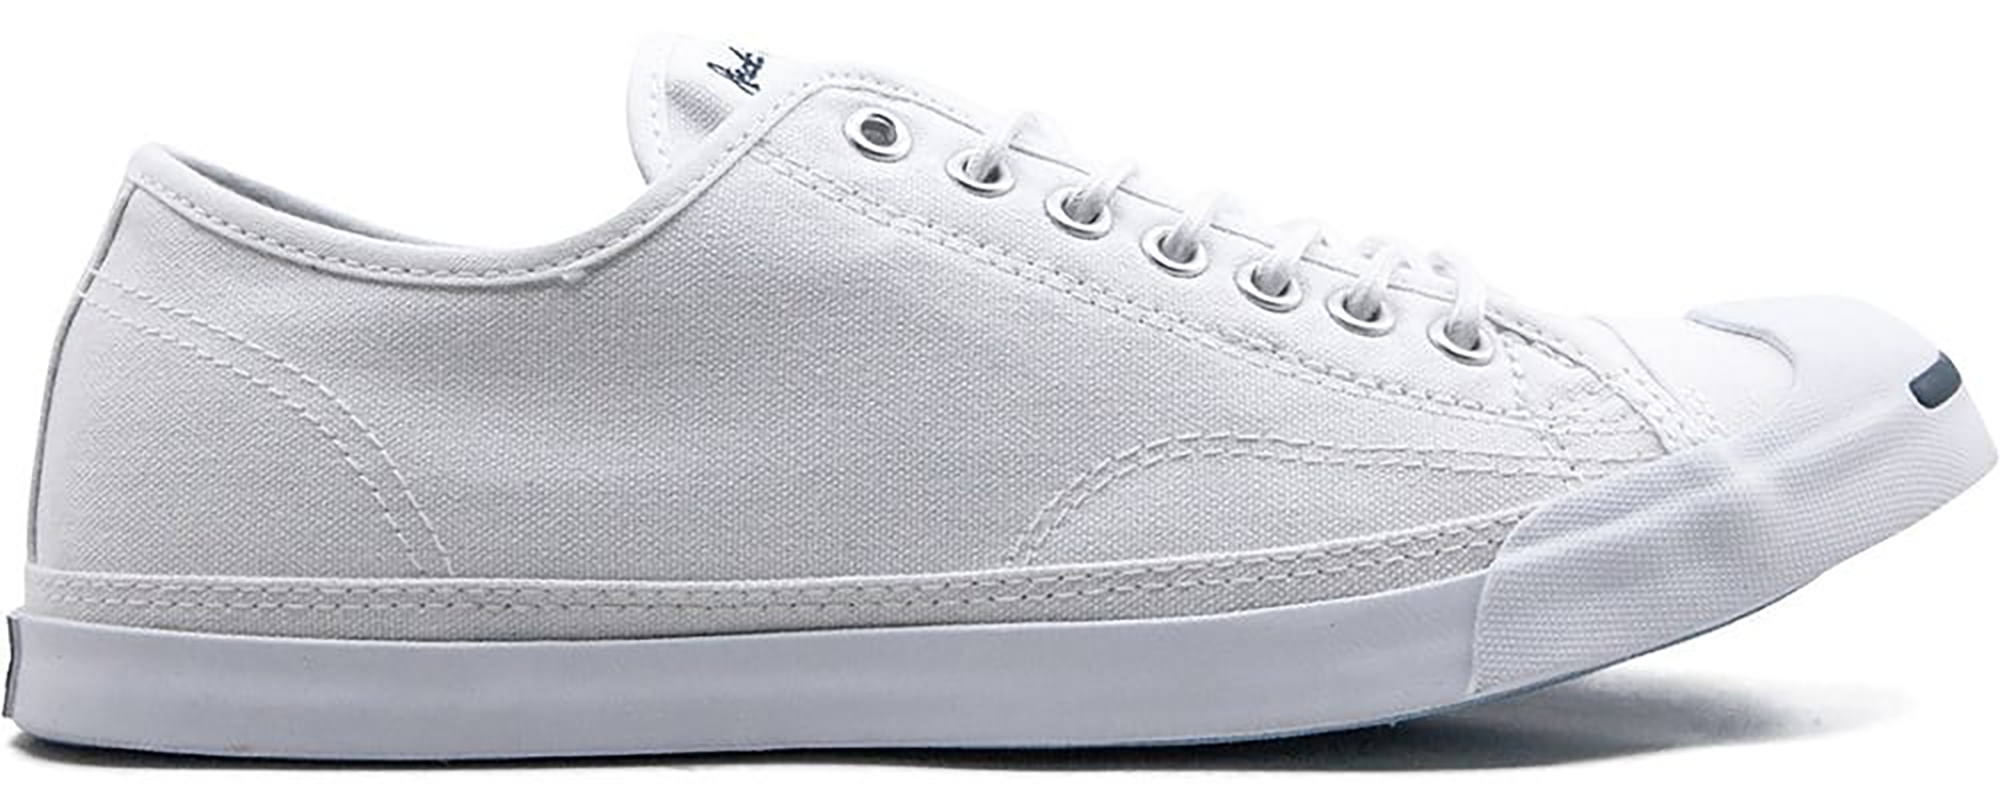 converse jack purcell low